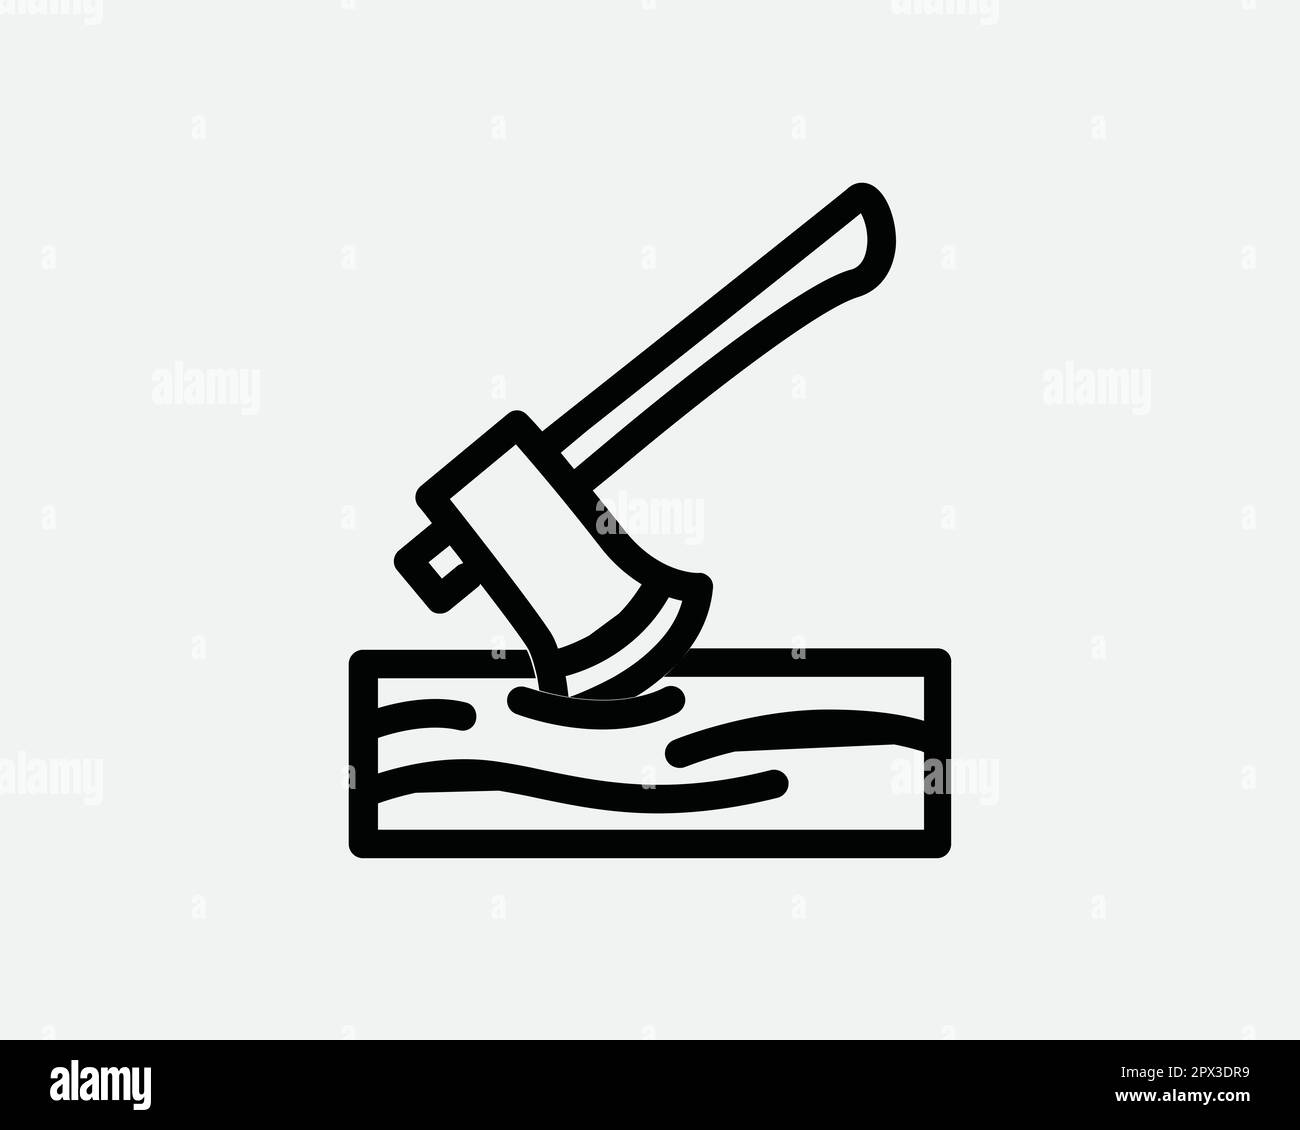 Axe Chop Wood Line Icon. Ax Chopping Firewood Lumber Log Symbol. Timber Cut Down Logging Sign. Black Vector Graphic Illustration Clipart Cricut Cutout Stock Vector